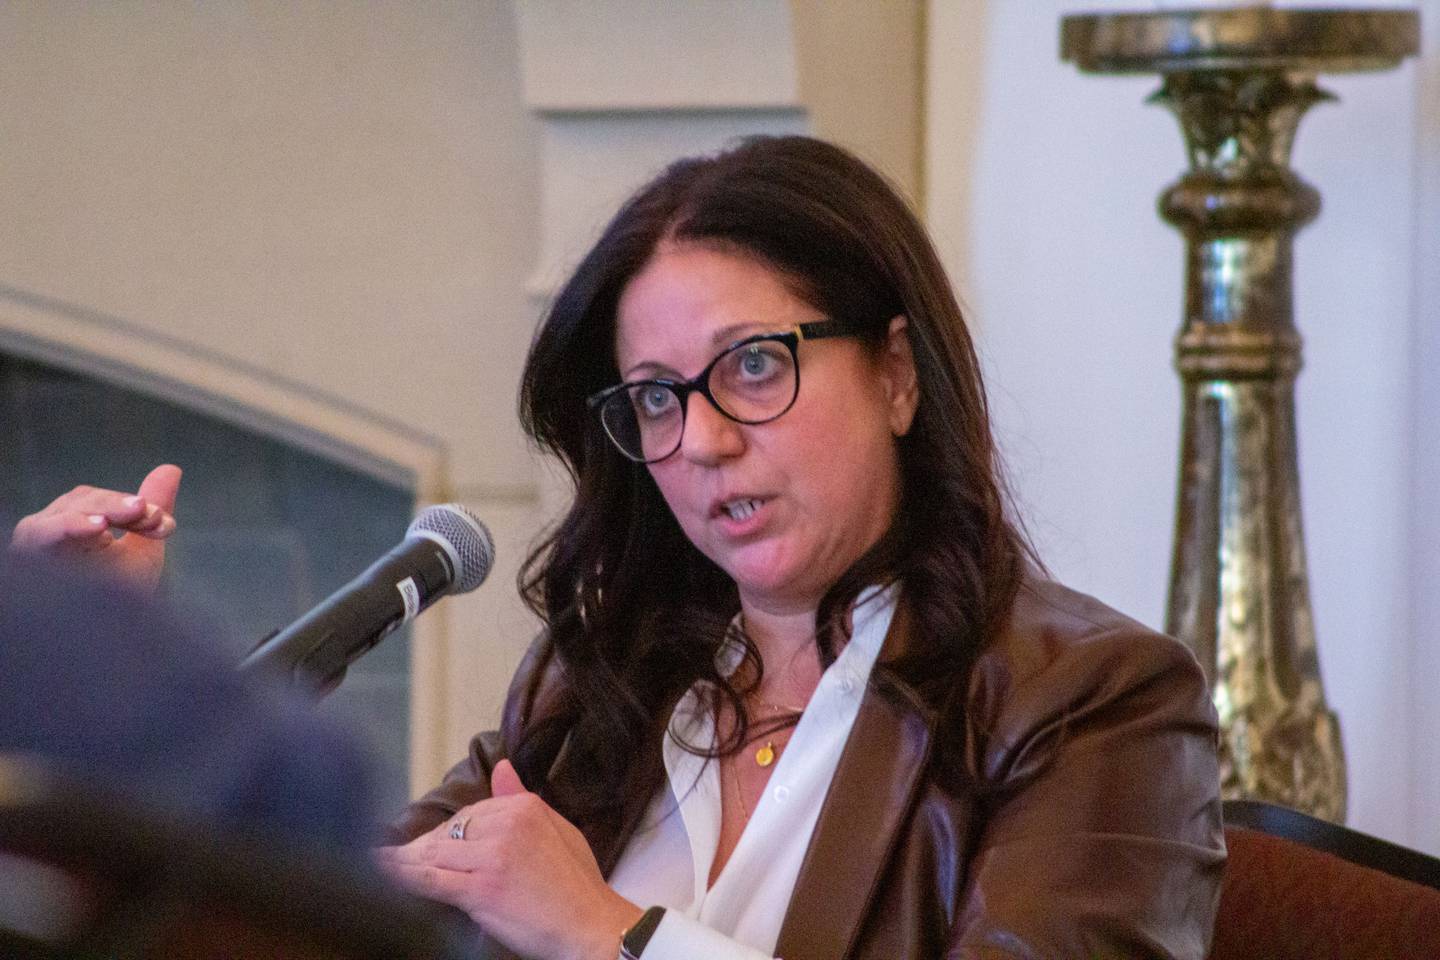 Deanne Benos, former assistant director of the Illinois Department of Corrections and co-founder of the Women’s Justice Institute, discusses planned prison rebuilds at a Chicago Illinois Justice Project reentry event in April.